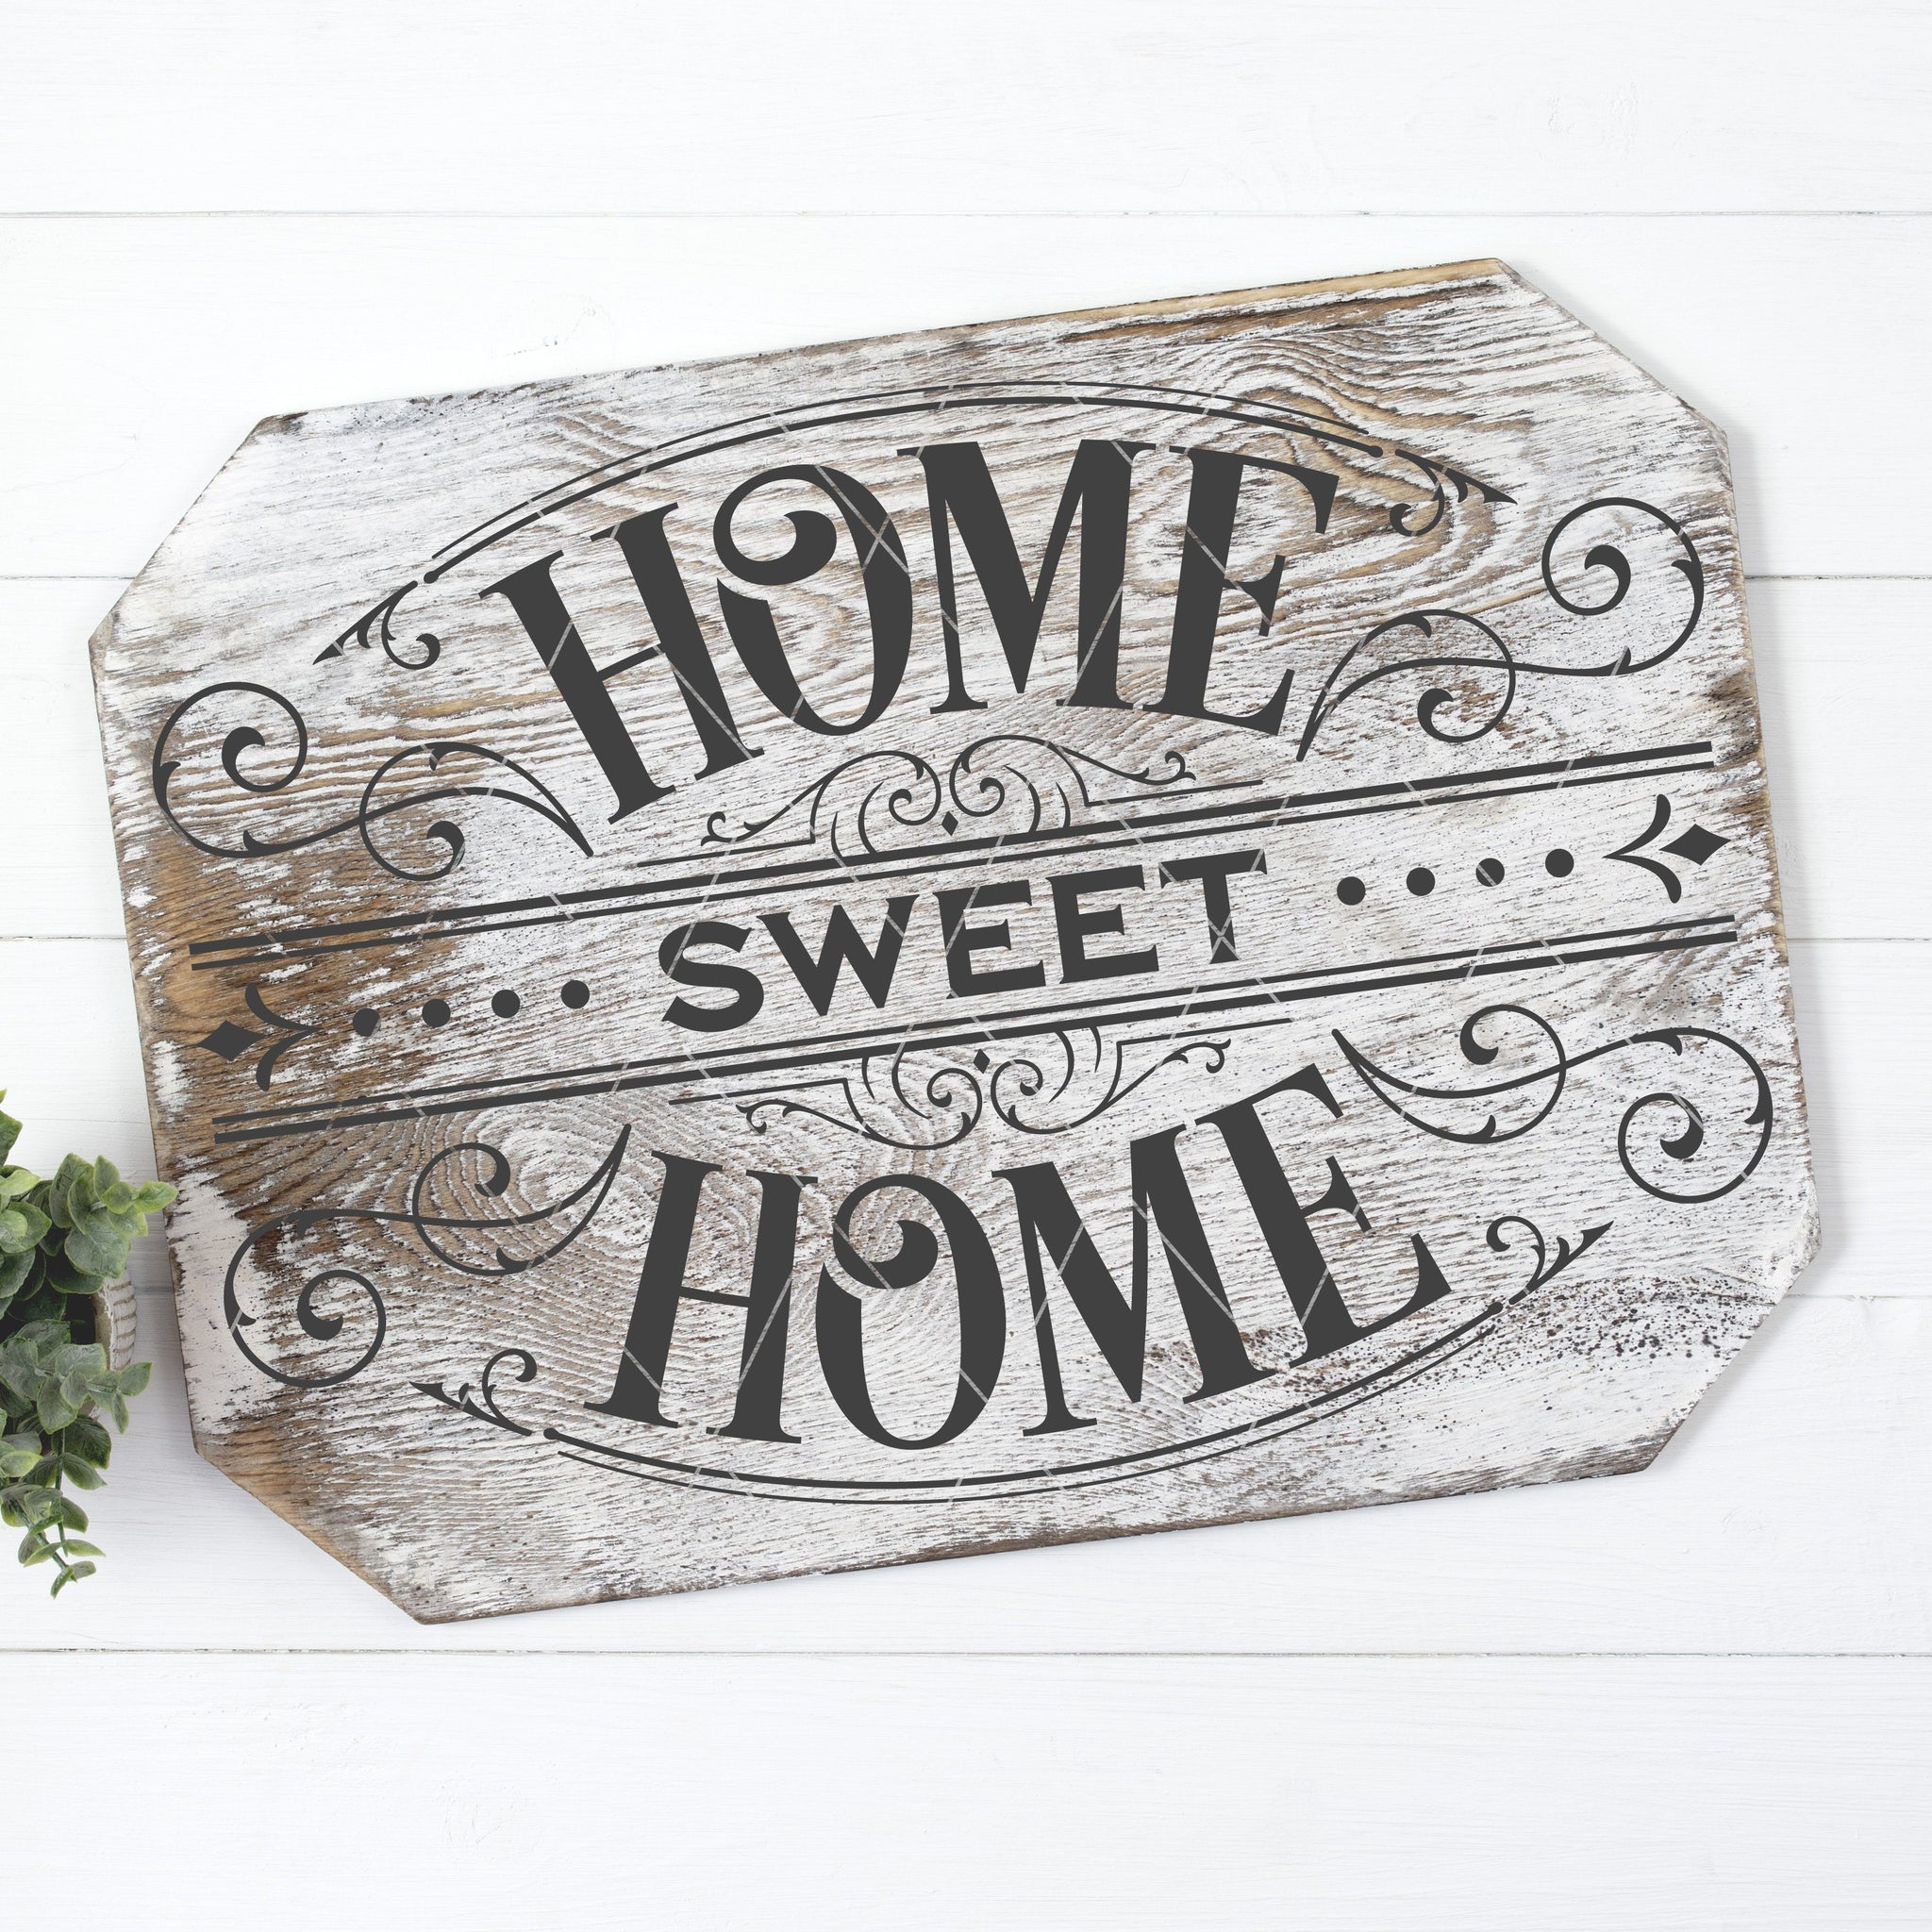 Victorian Style Home Sweet Home Cuttable SVG File - Commercial Use SVG Files for Cricut & Silhouette